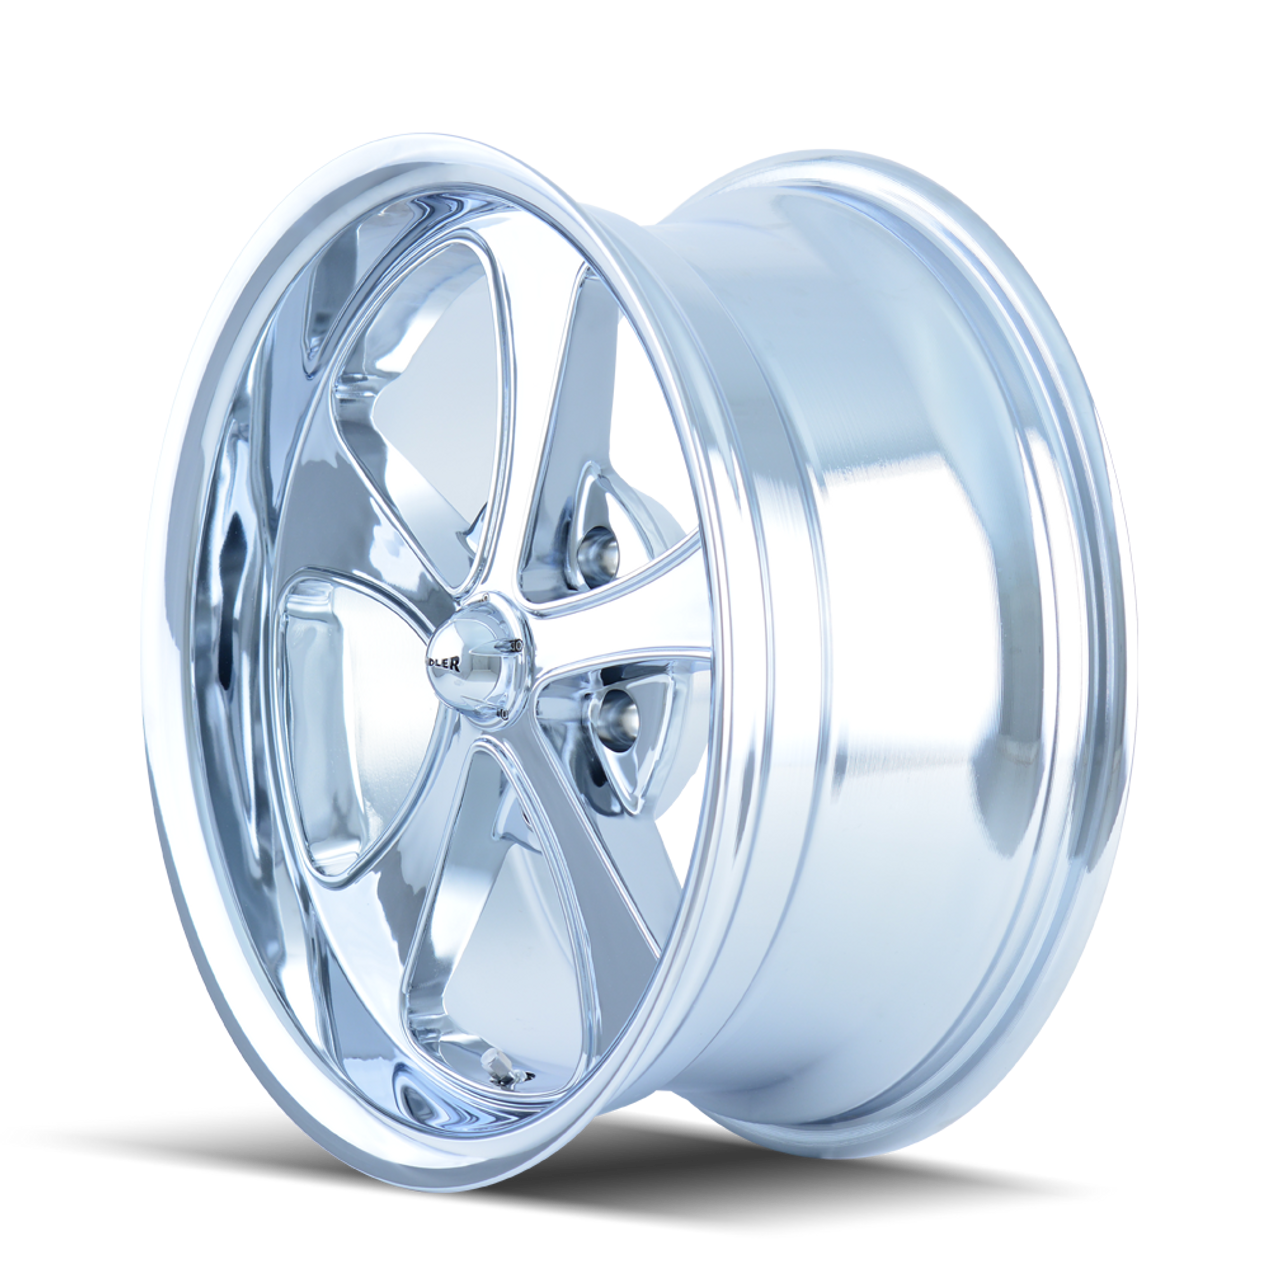 Set 4 18" Ridler 645 18x9.5 Chrome 5x4.5 Wheels 0mm Rims For Ford Jeep Truck